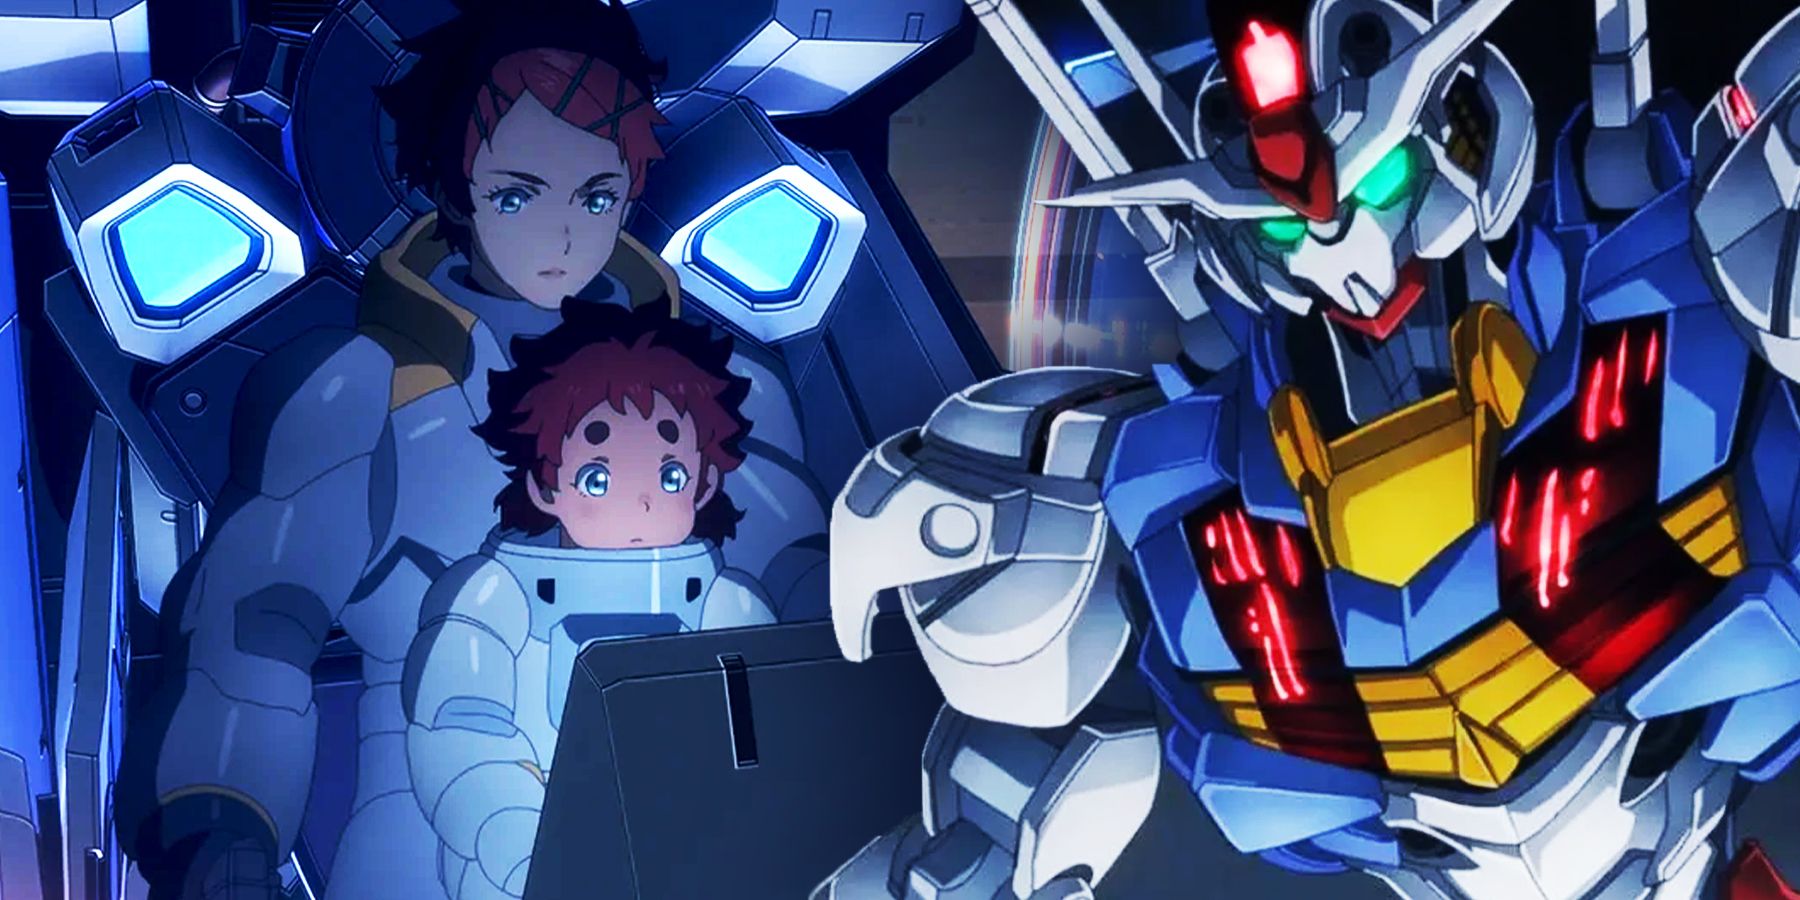 On the left, Ericht Sumaya looks at a monitor with Prospera. On the right, Gundam Aerial is posed.  